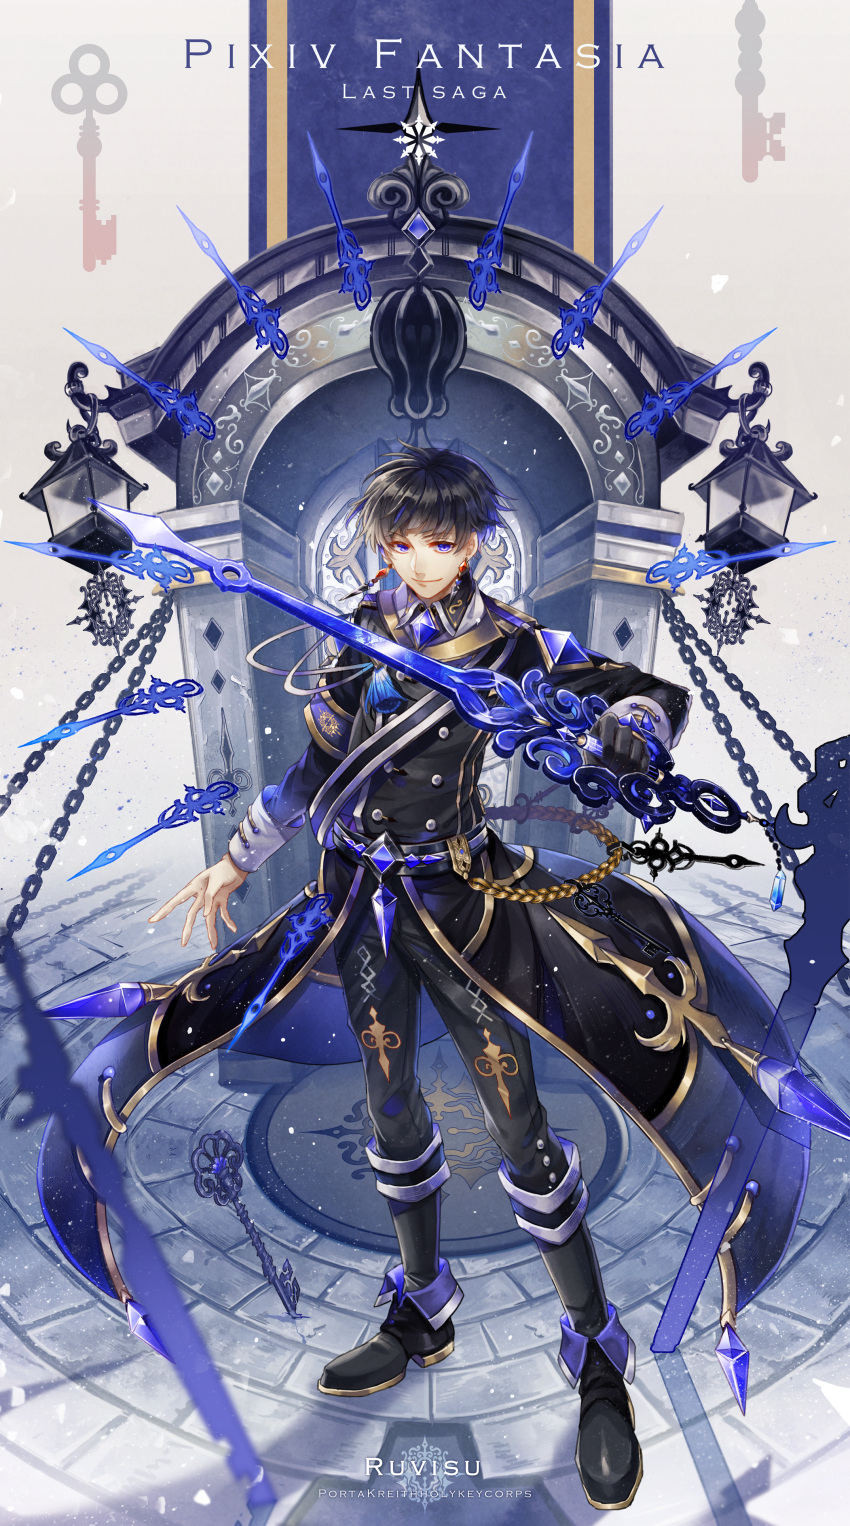 1boy absurdres arch armband black_gloves black_hair black_pants blue_eyes chain character_name copyright_name earrings full_body gloves highres holding holding_sword holding_weapon huge_filesize jewelry key lantern male_focus military military_uniform pants pixiv_fantasia pixiv_fantasia_last_saga ruvisu_(pixiv_fantasia_last_saga) standing sword uniform weapon yorukage